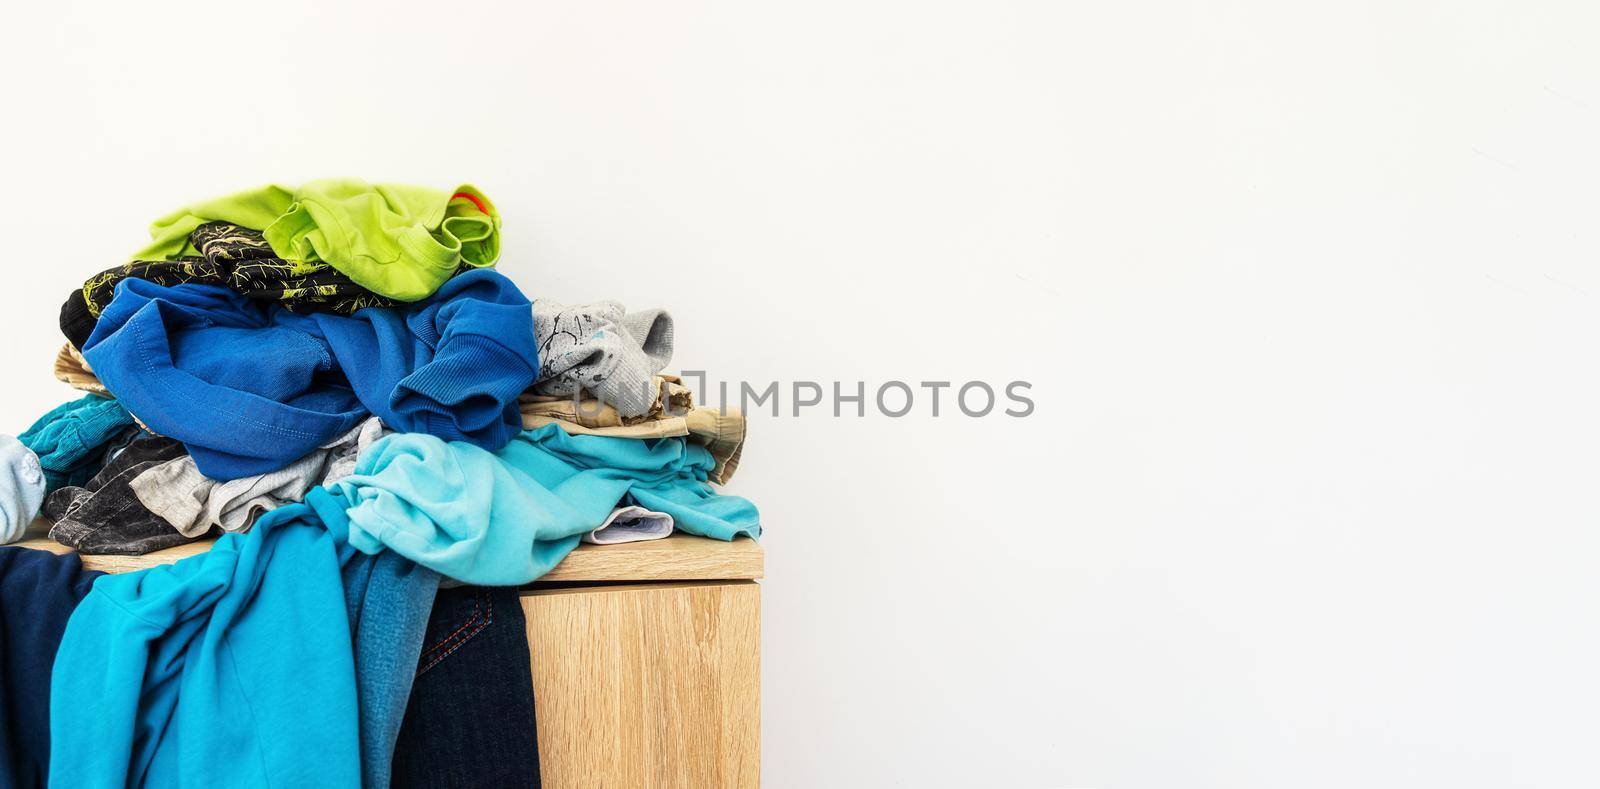 Banner with copy paste for space organization specialist and ordering concept. A pile of scattered blue things in pile on shelf. close-up, empty space for your design. Mockup cleaning product, laundry